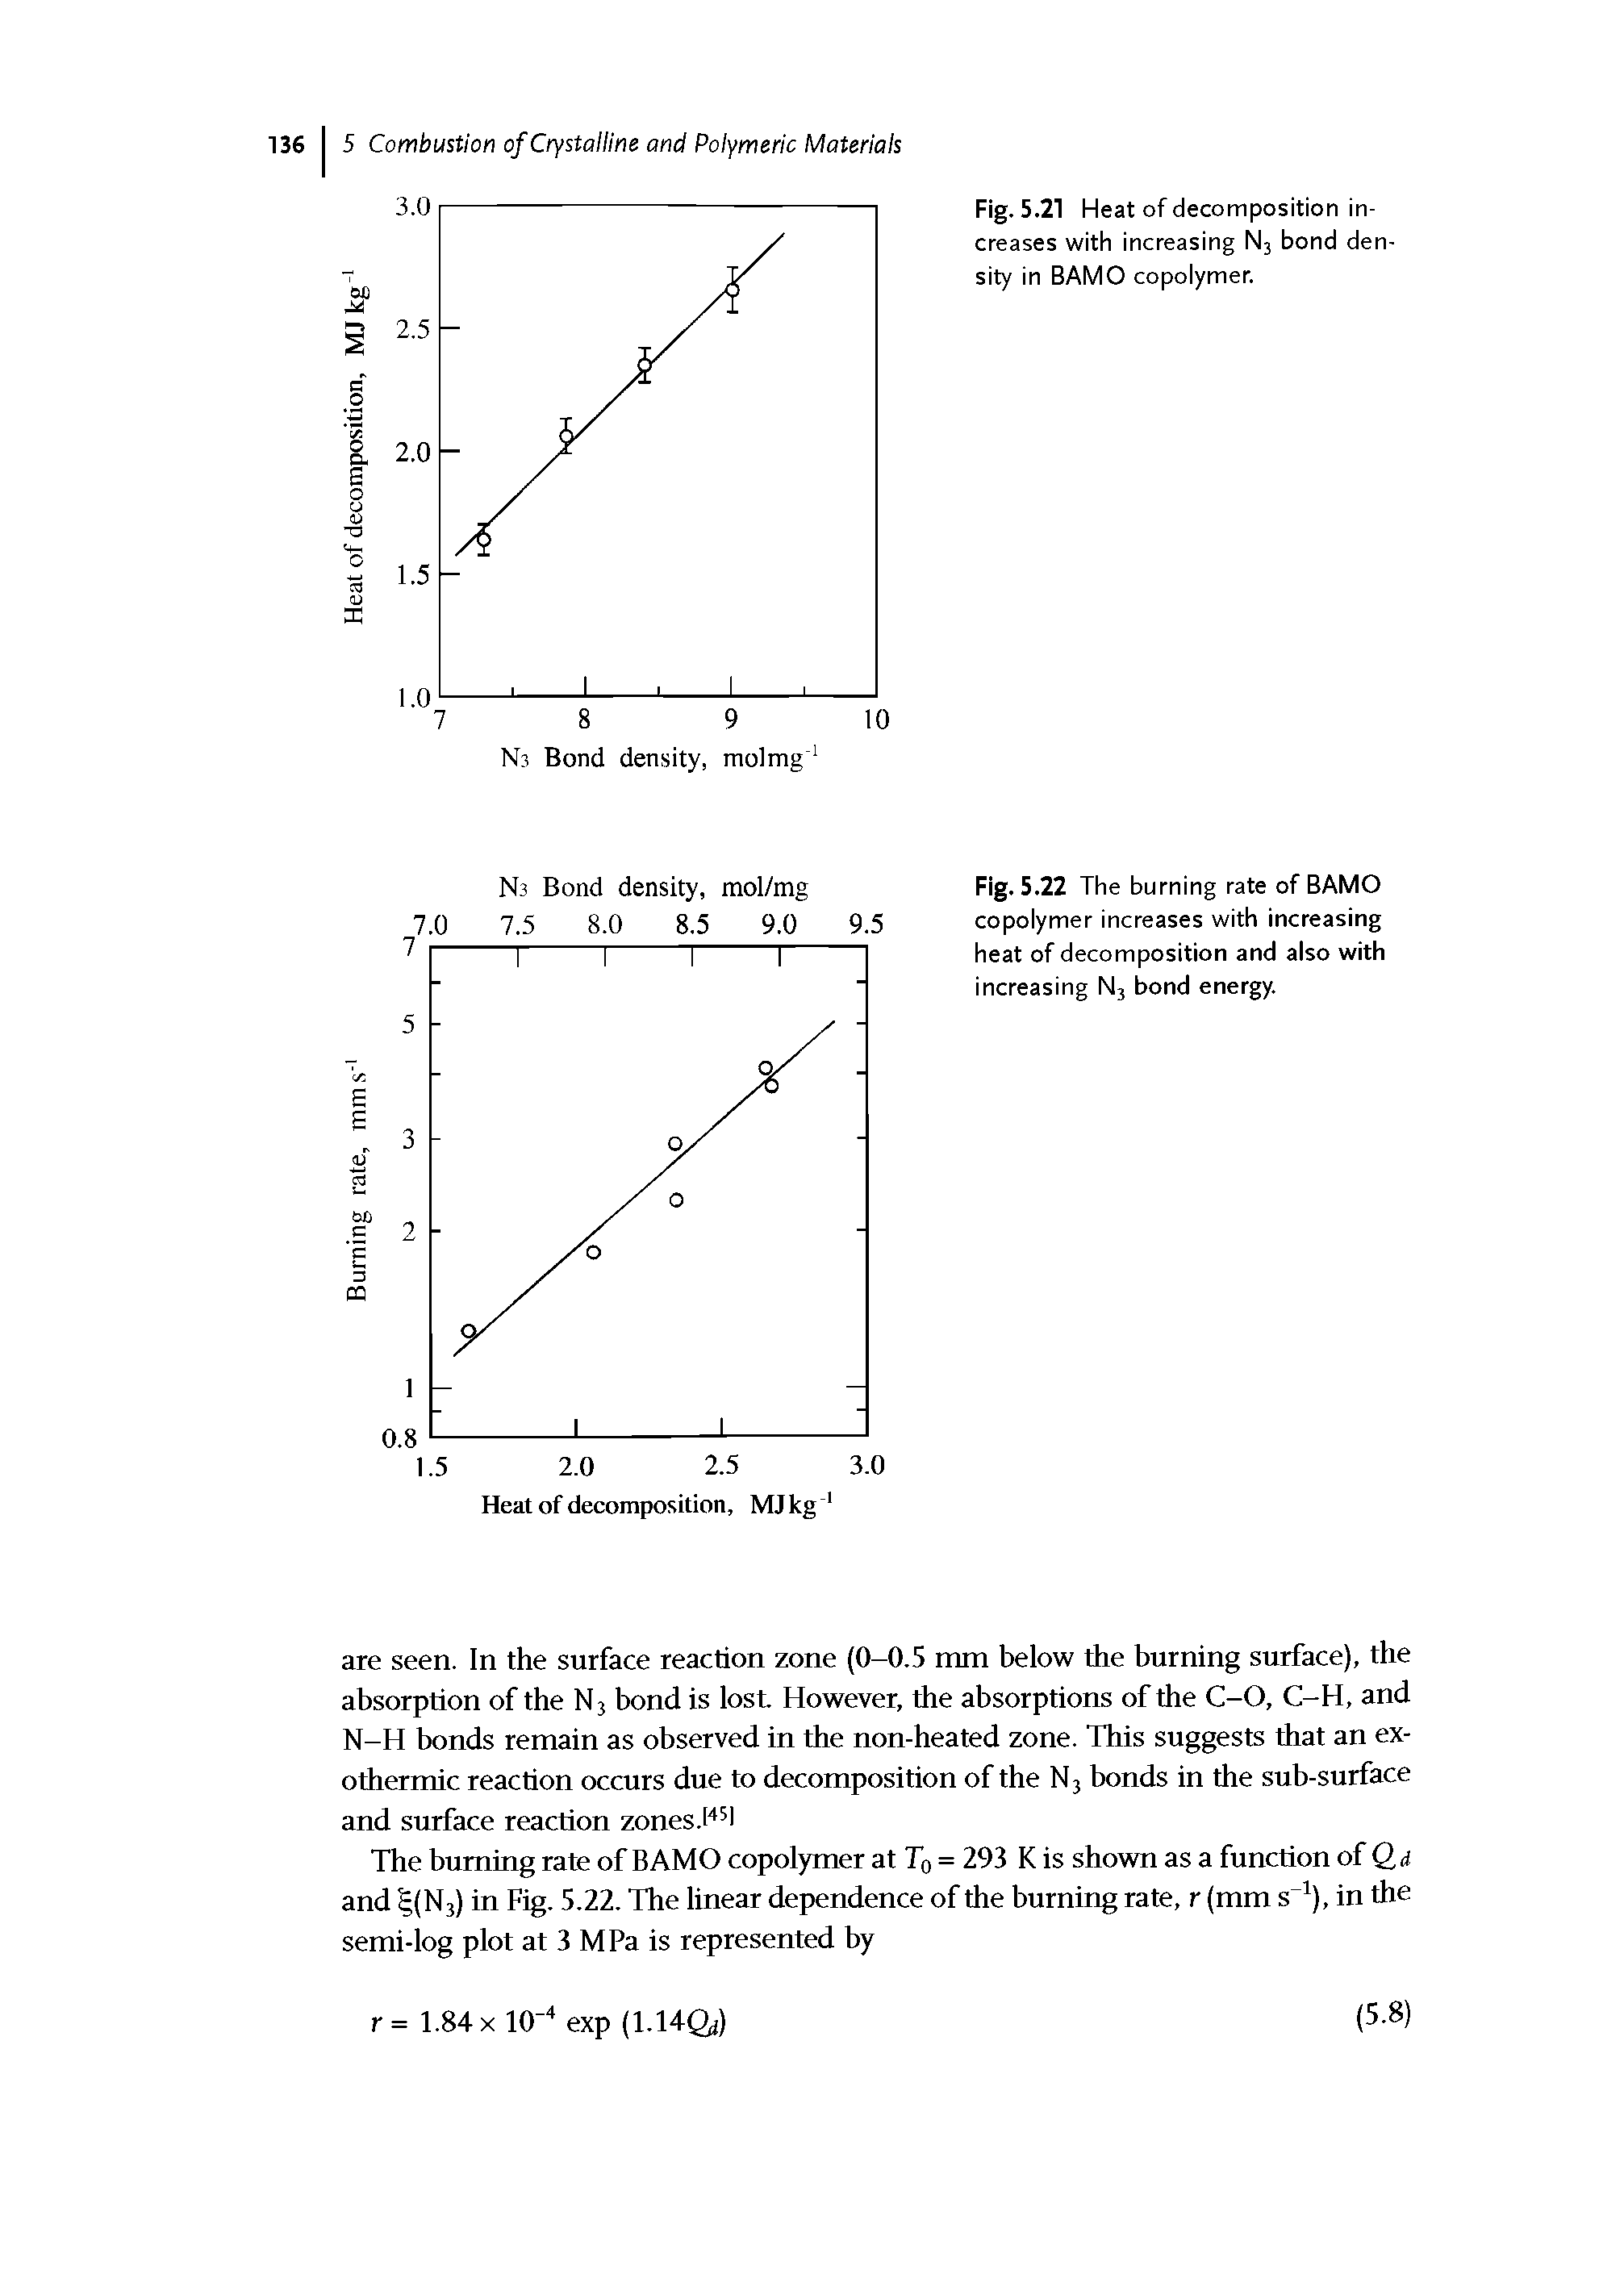 Fig. 5.22 The burning rate of BAMO copolymer increases with increasing heat of decomposition and aiso with increasing Nj bond energy.